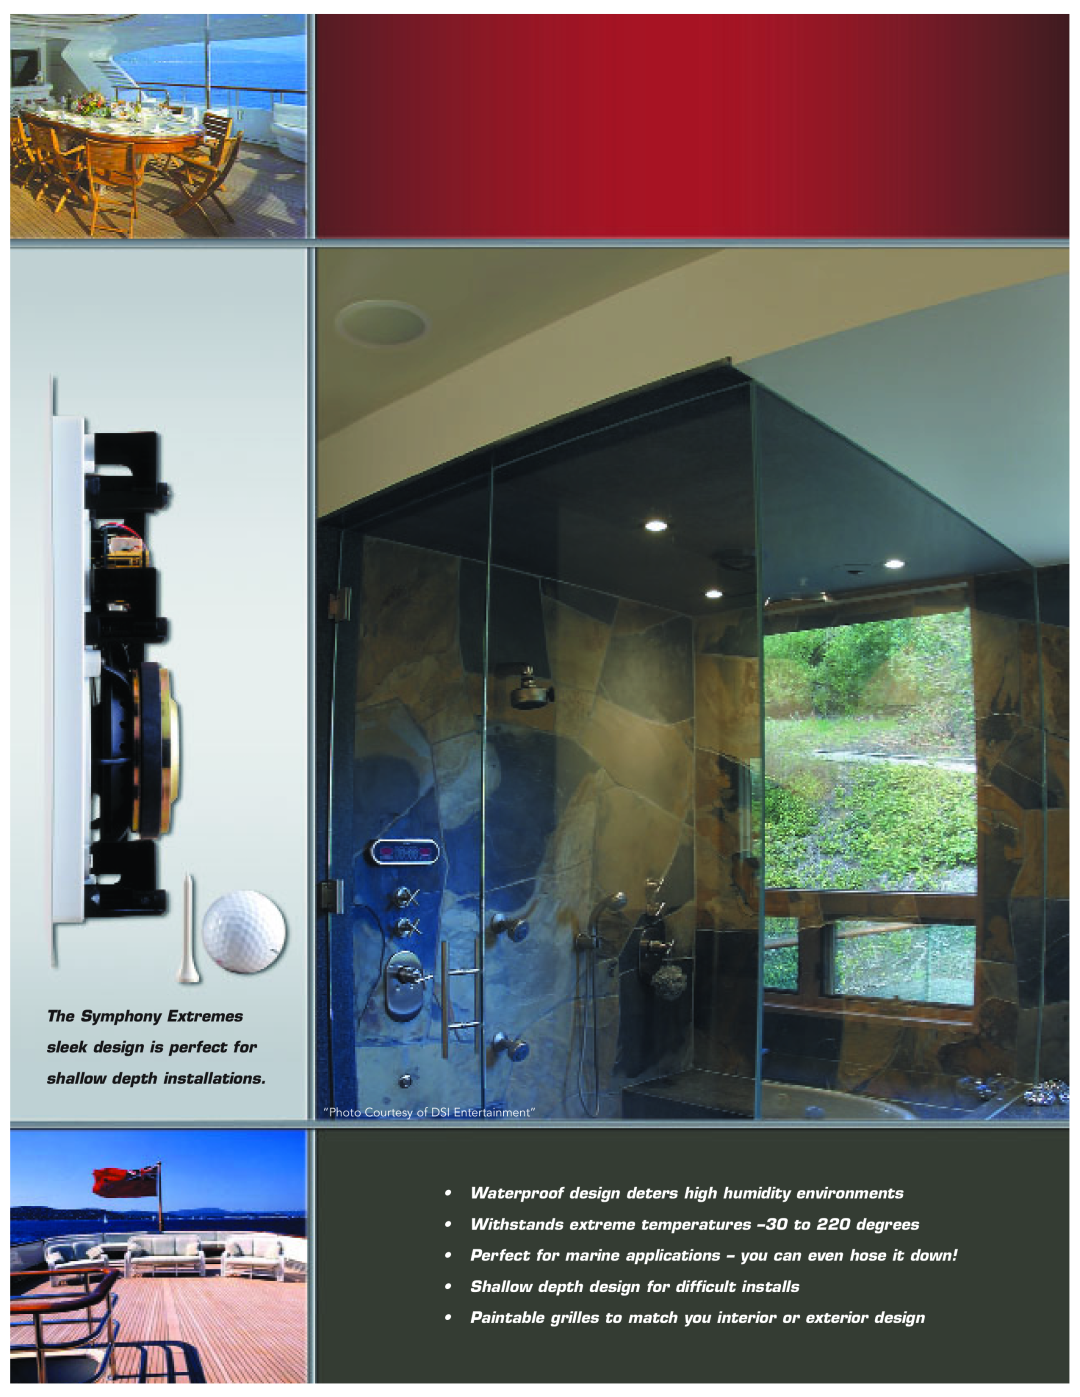 Sonance manual The Symphony Extremes sleek design is perfect for, shallow depth installations 